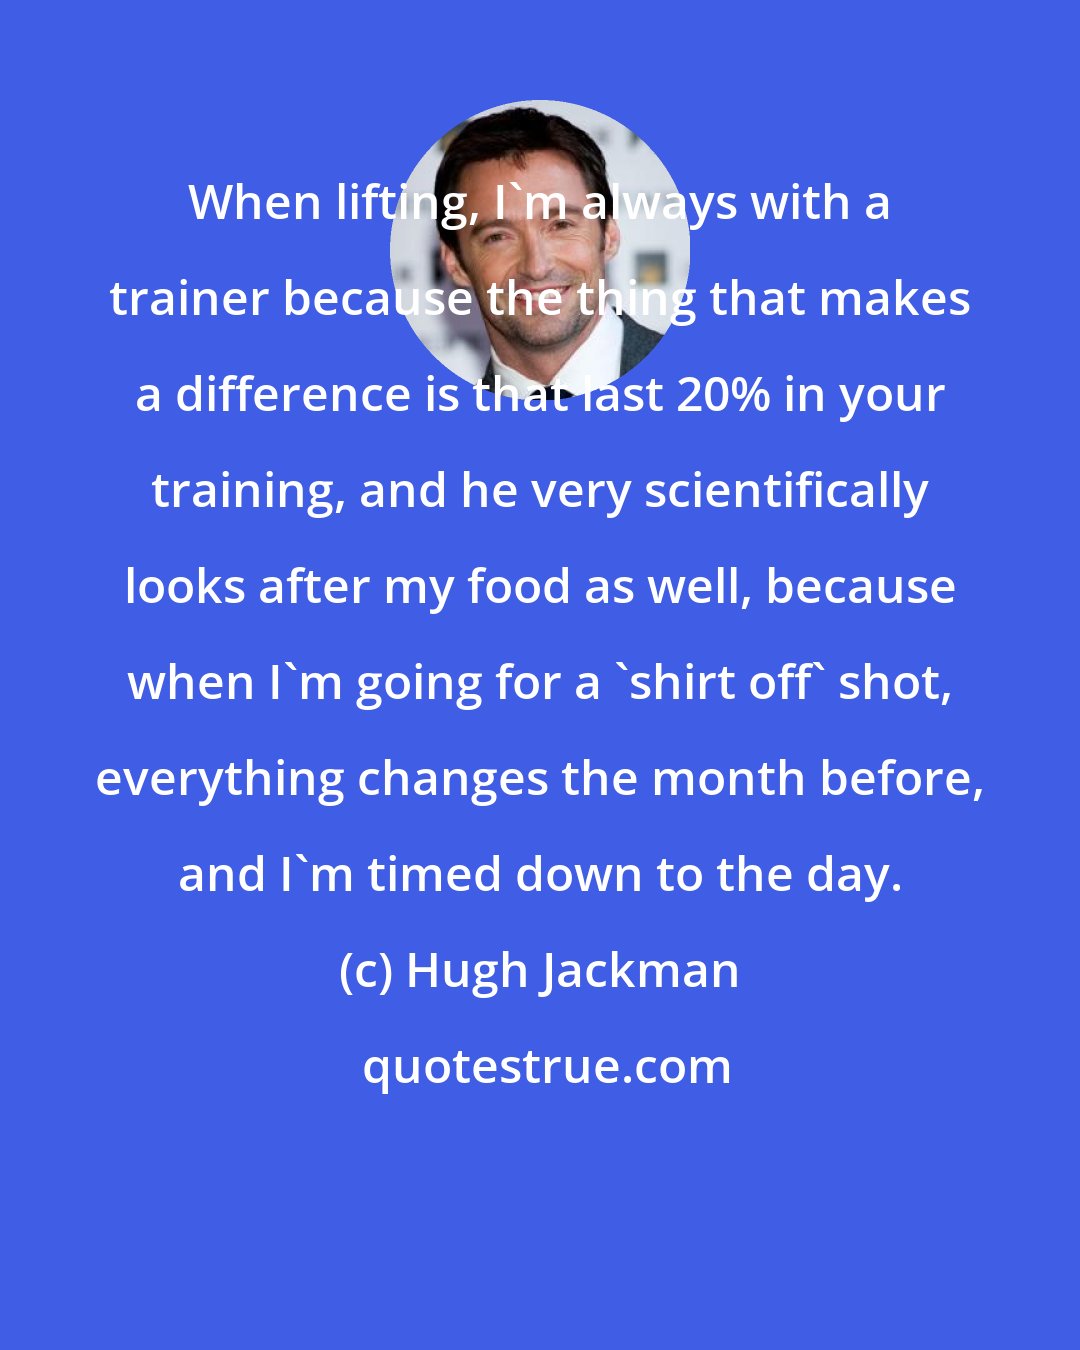 Hugh Jackman: When lifting, I'm always with a trainer because the thing that makes a difference is that last 20% in your training, and he very scientifically looks after my food as well, because when I'm going for a 'shirt off' shot, everything changes the month before, and I'm timed down to the day.